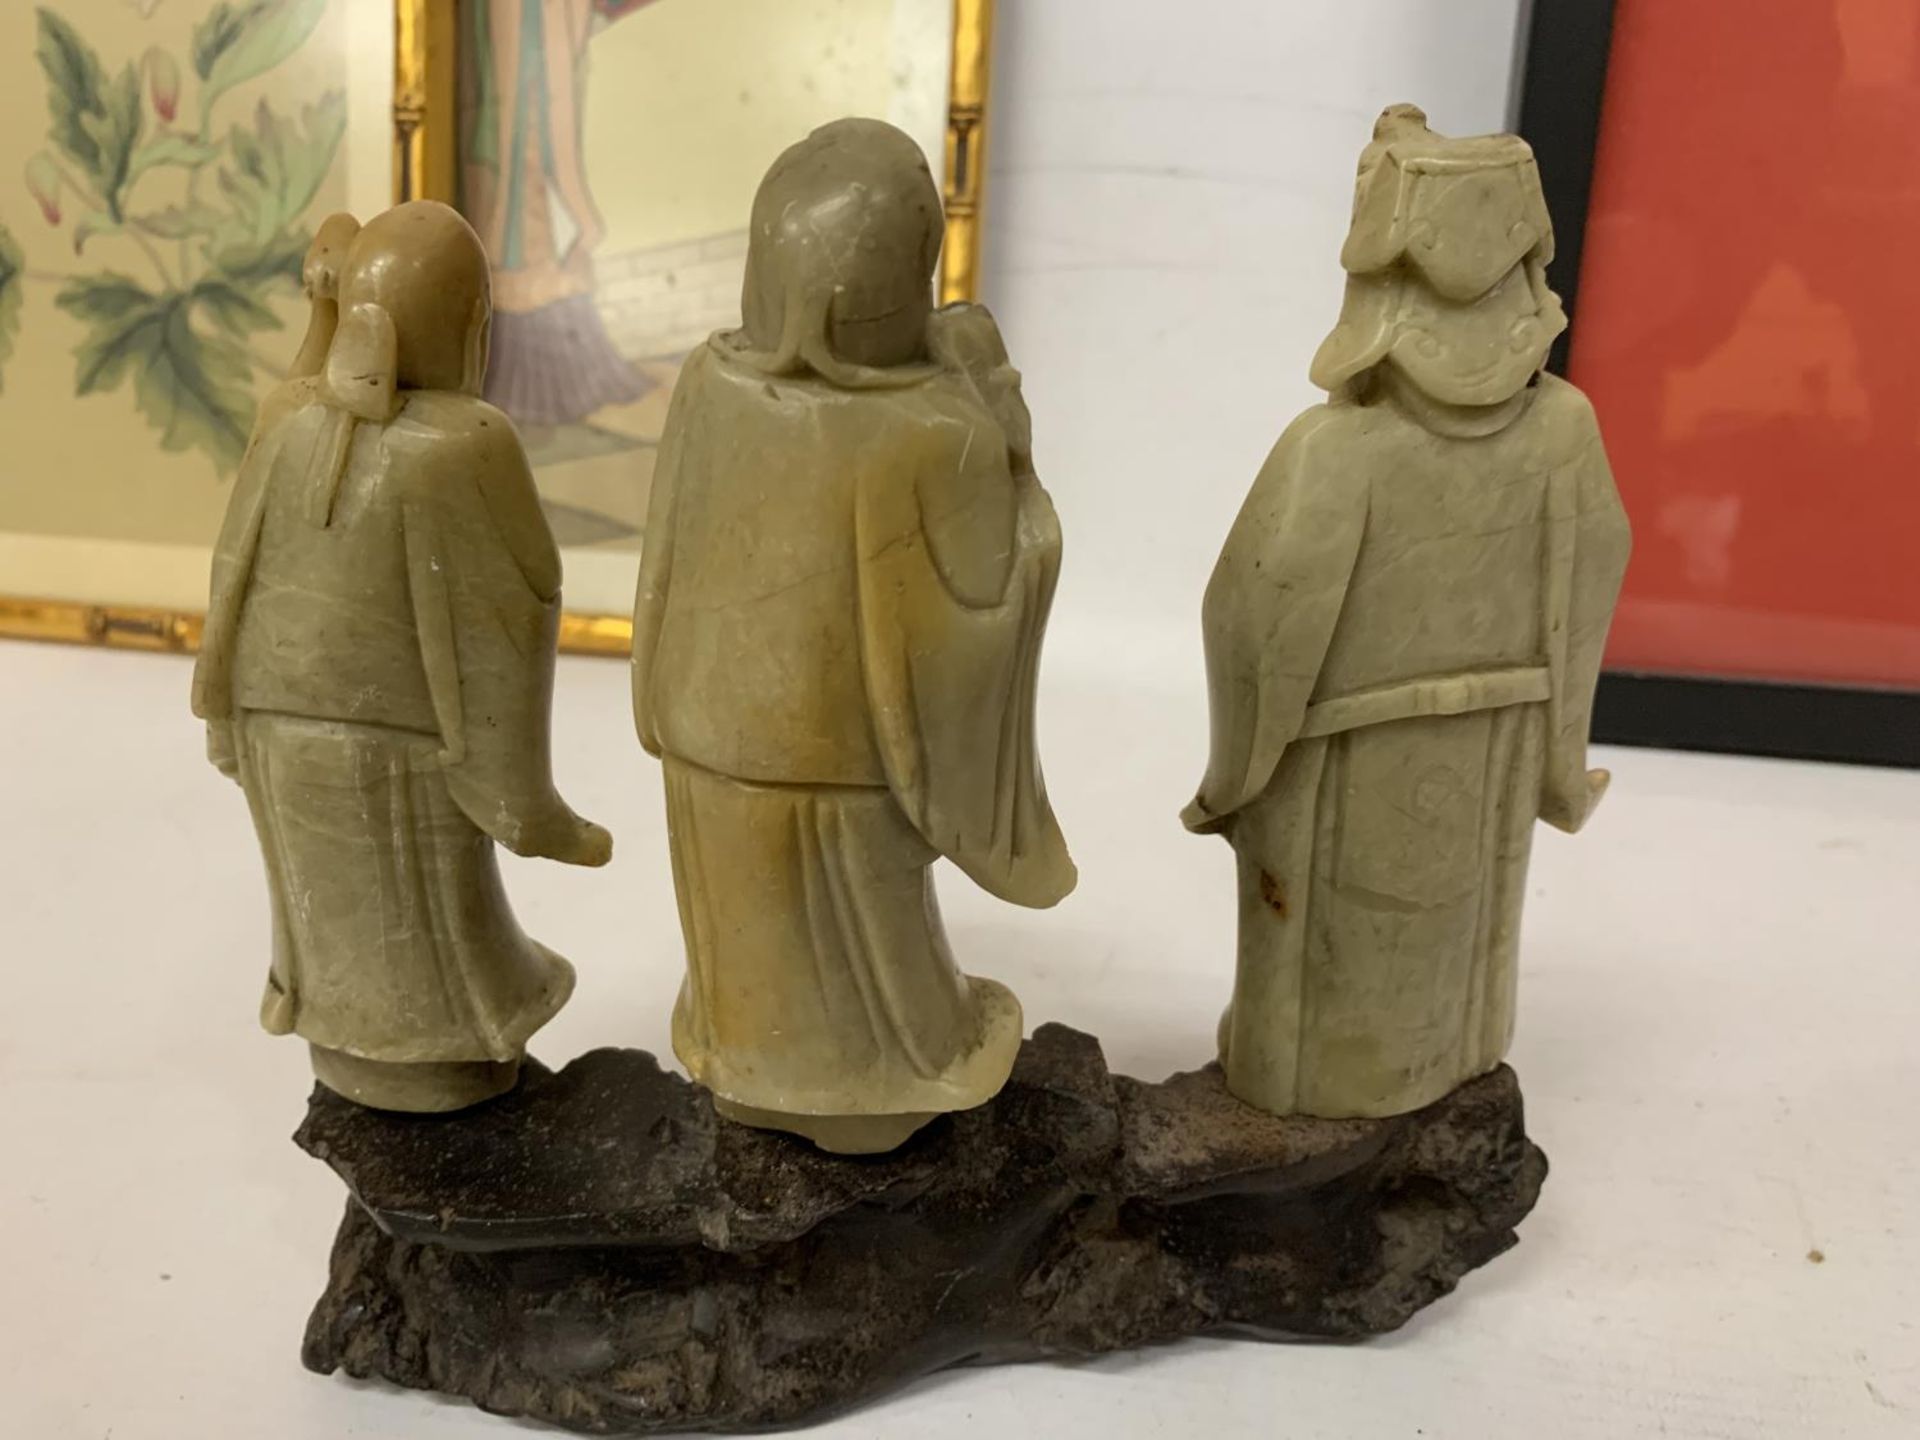 A FINE CHINESE CARVED SOAPSTONE FIGURE GROUP OF THREE IMMORTALS MOUNTED ON A CARVED STAND - Image 4 of 4